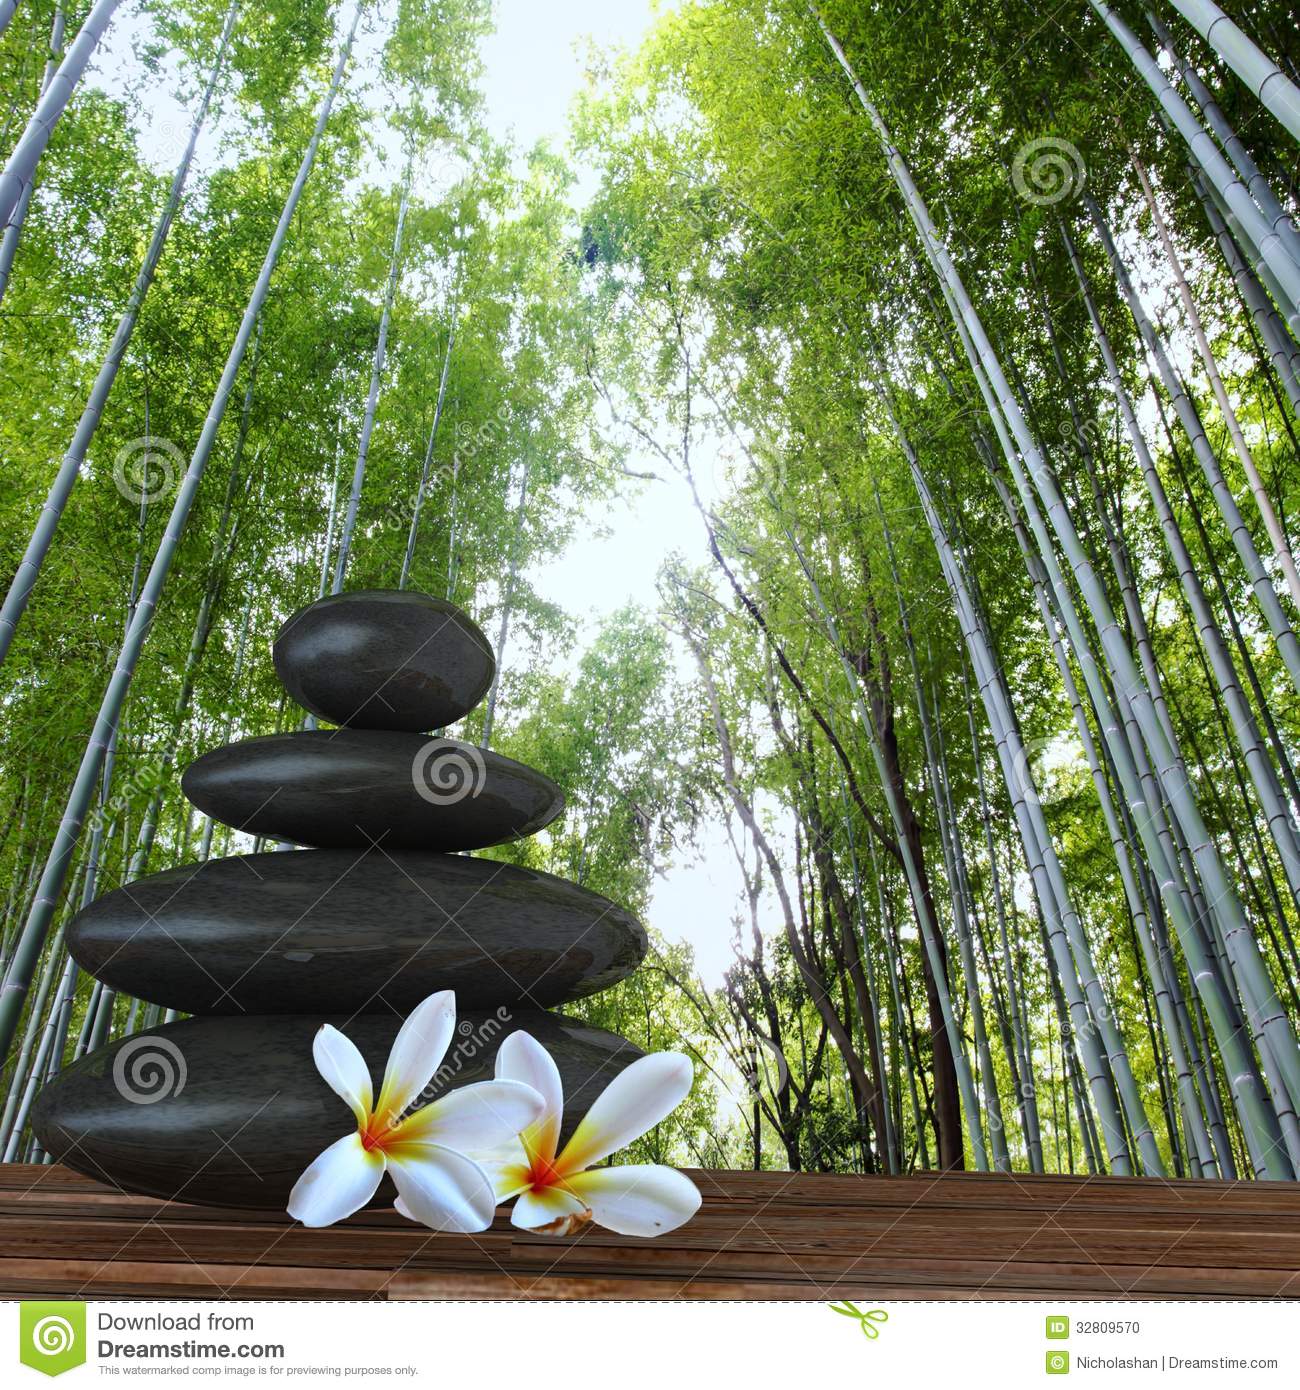 Zen Basalt Stones And Bamboo Stone With Flower In